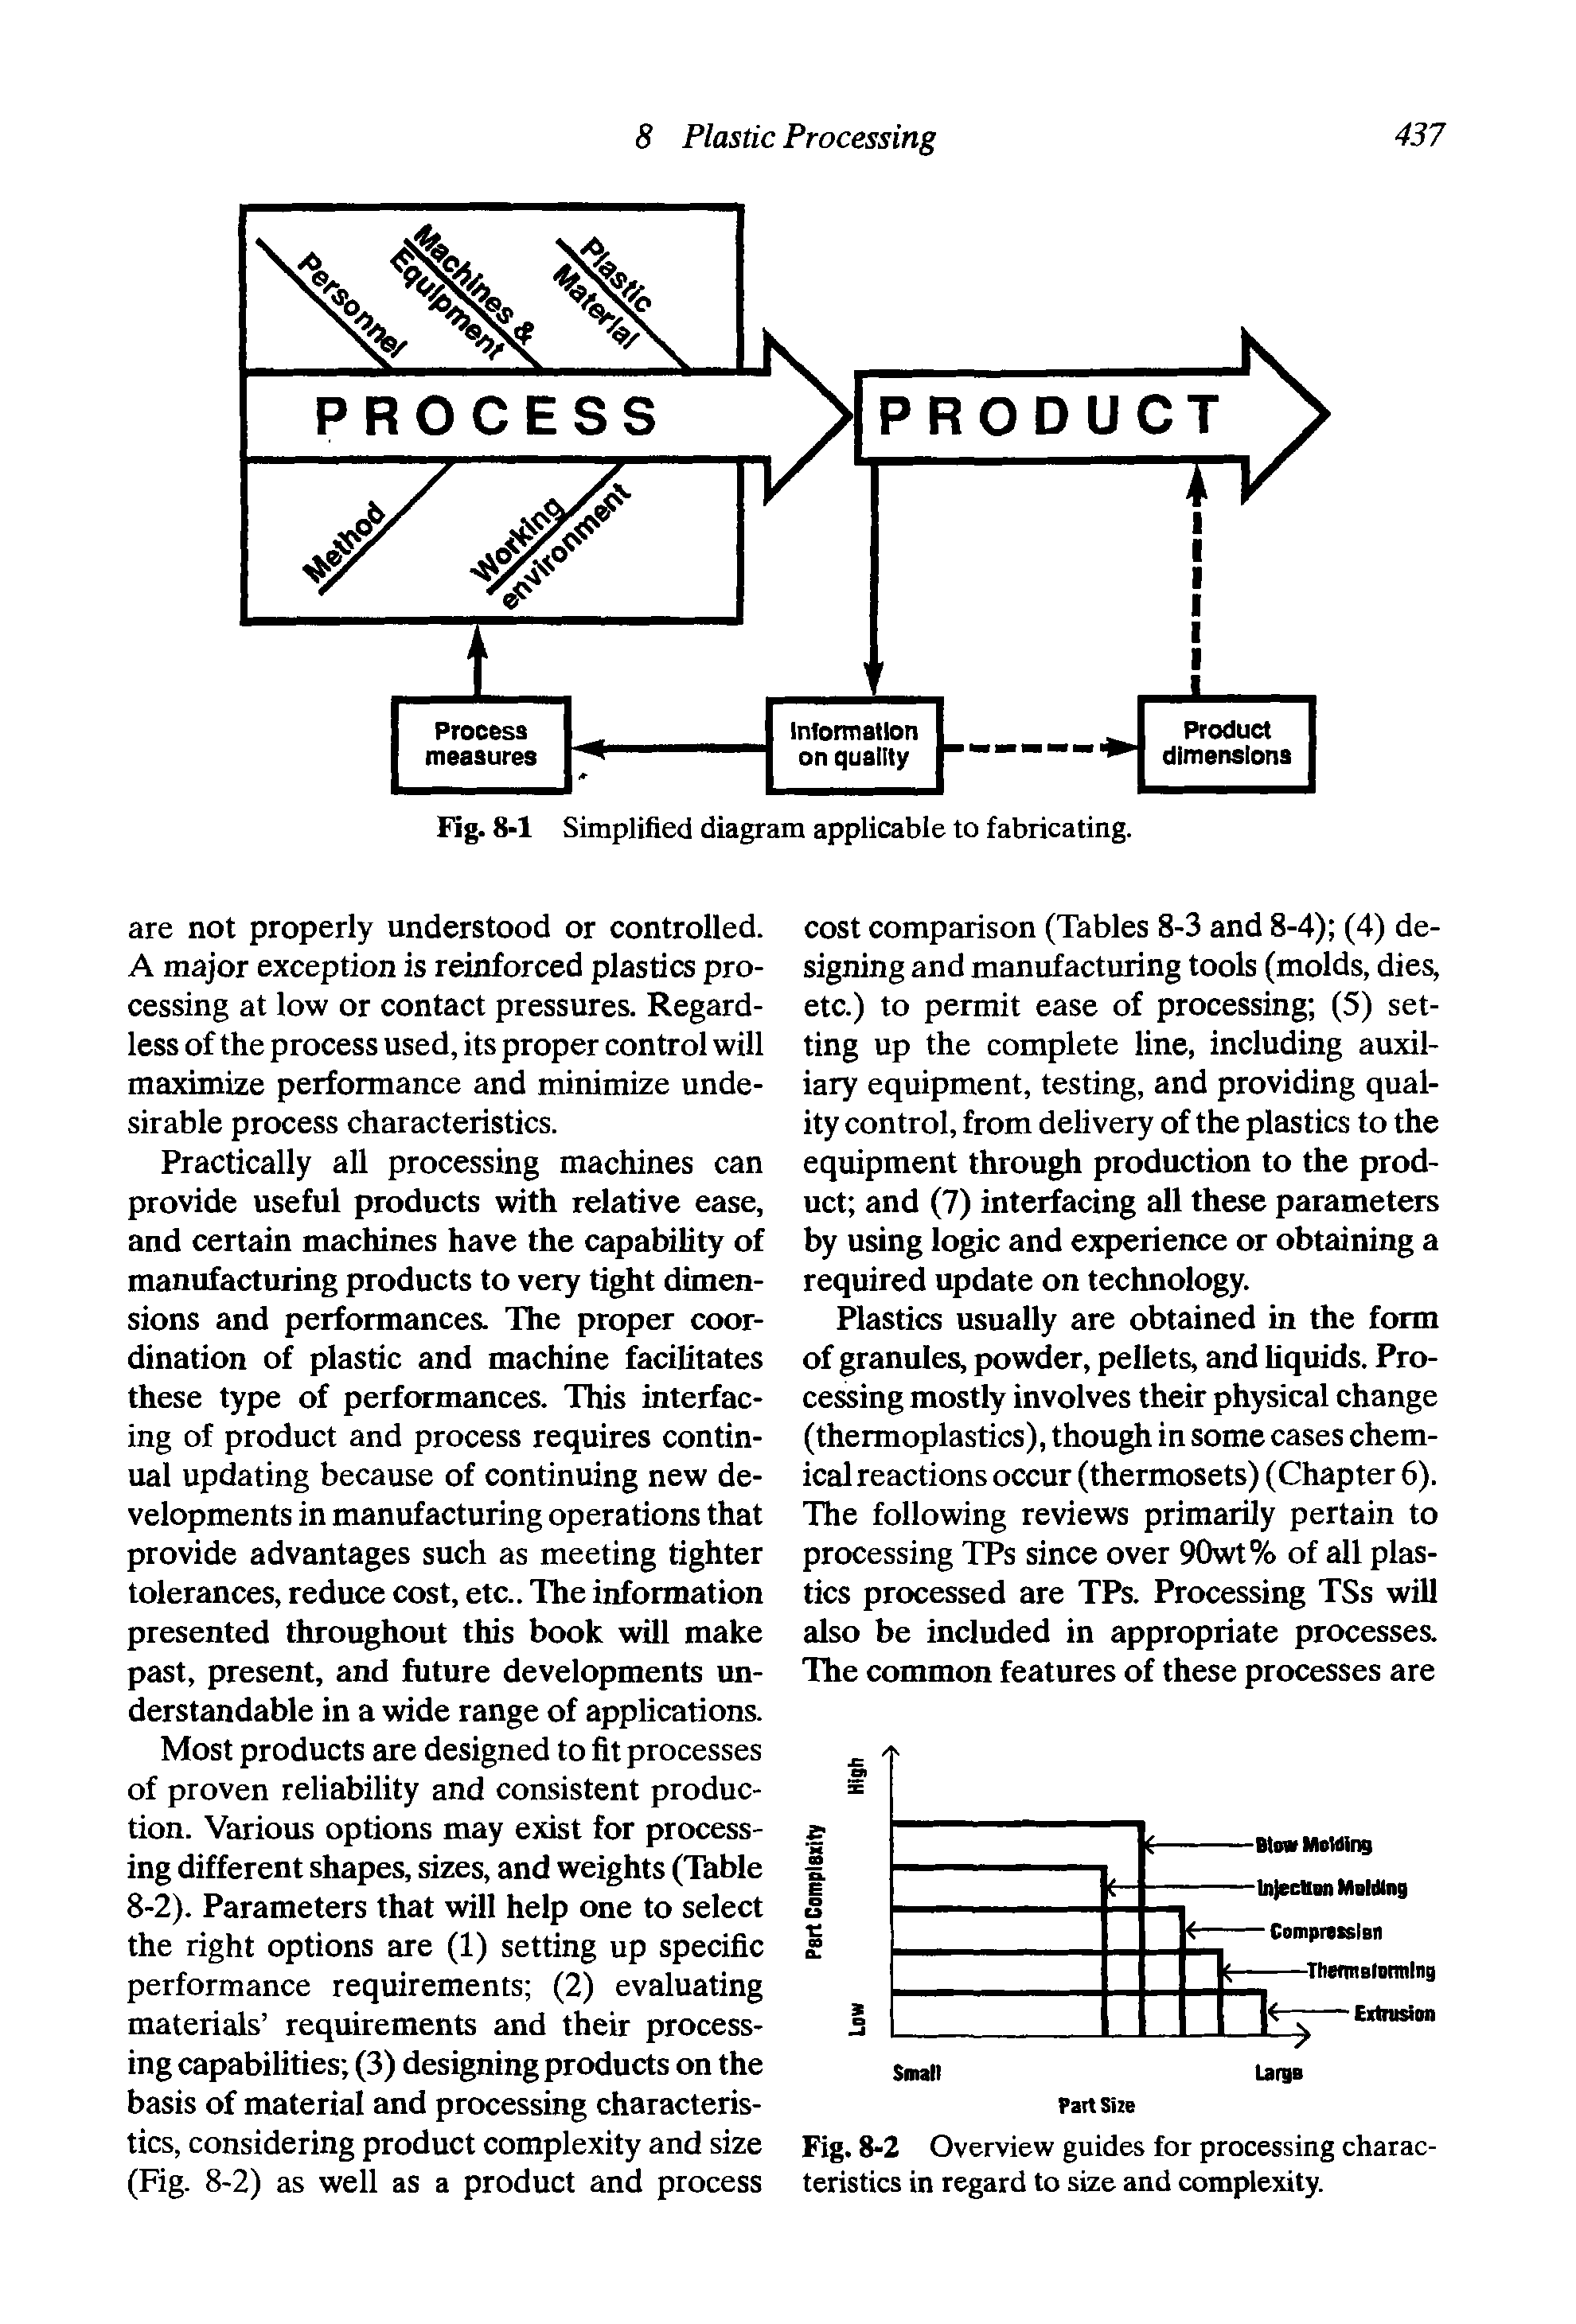 Fig. 8-2 Overview guides for processing characteristics in regard to size and complexity.